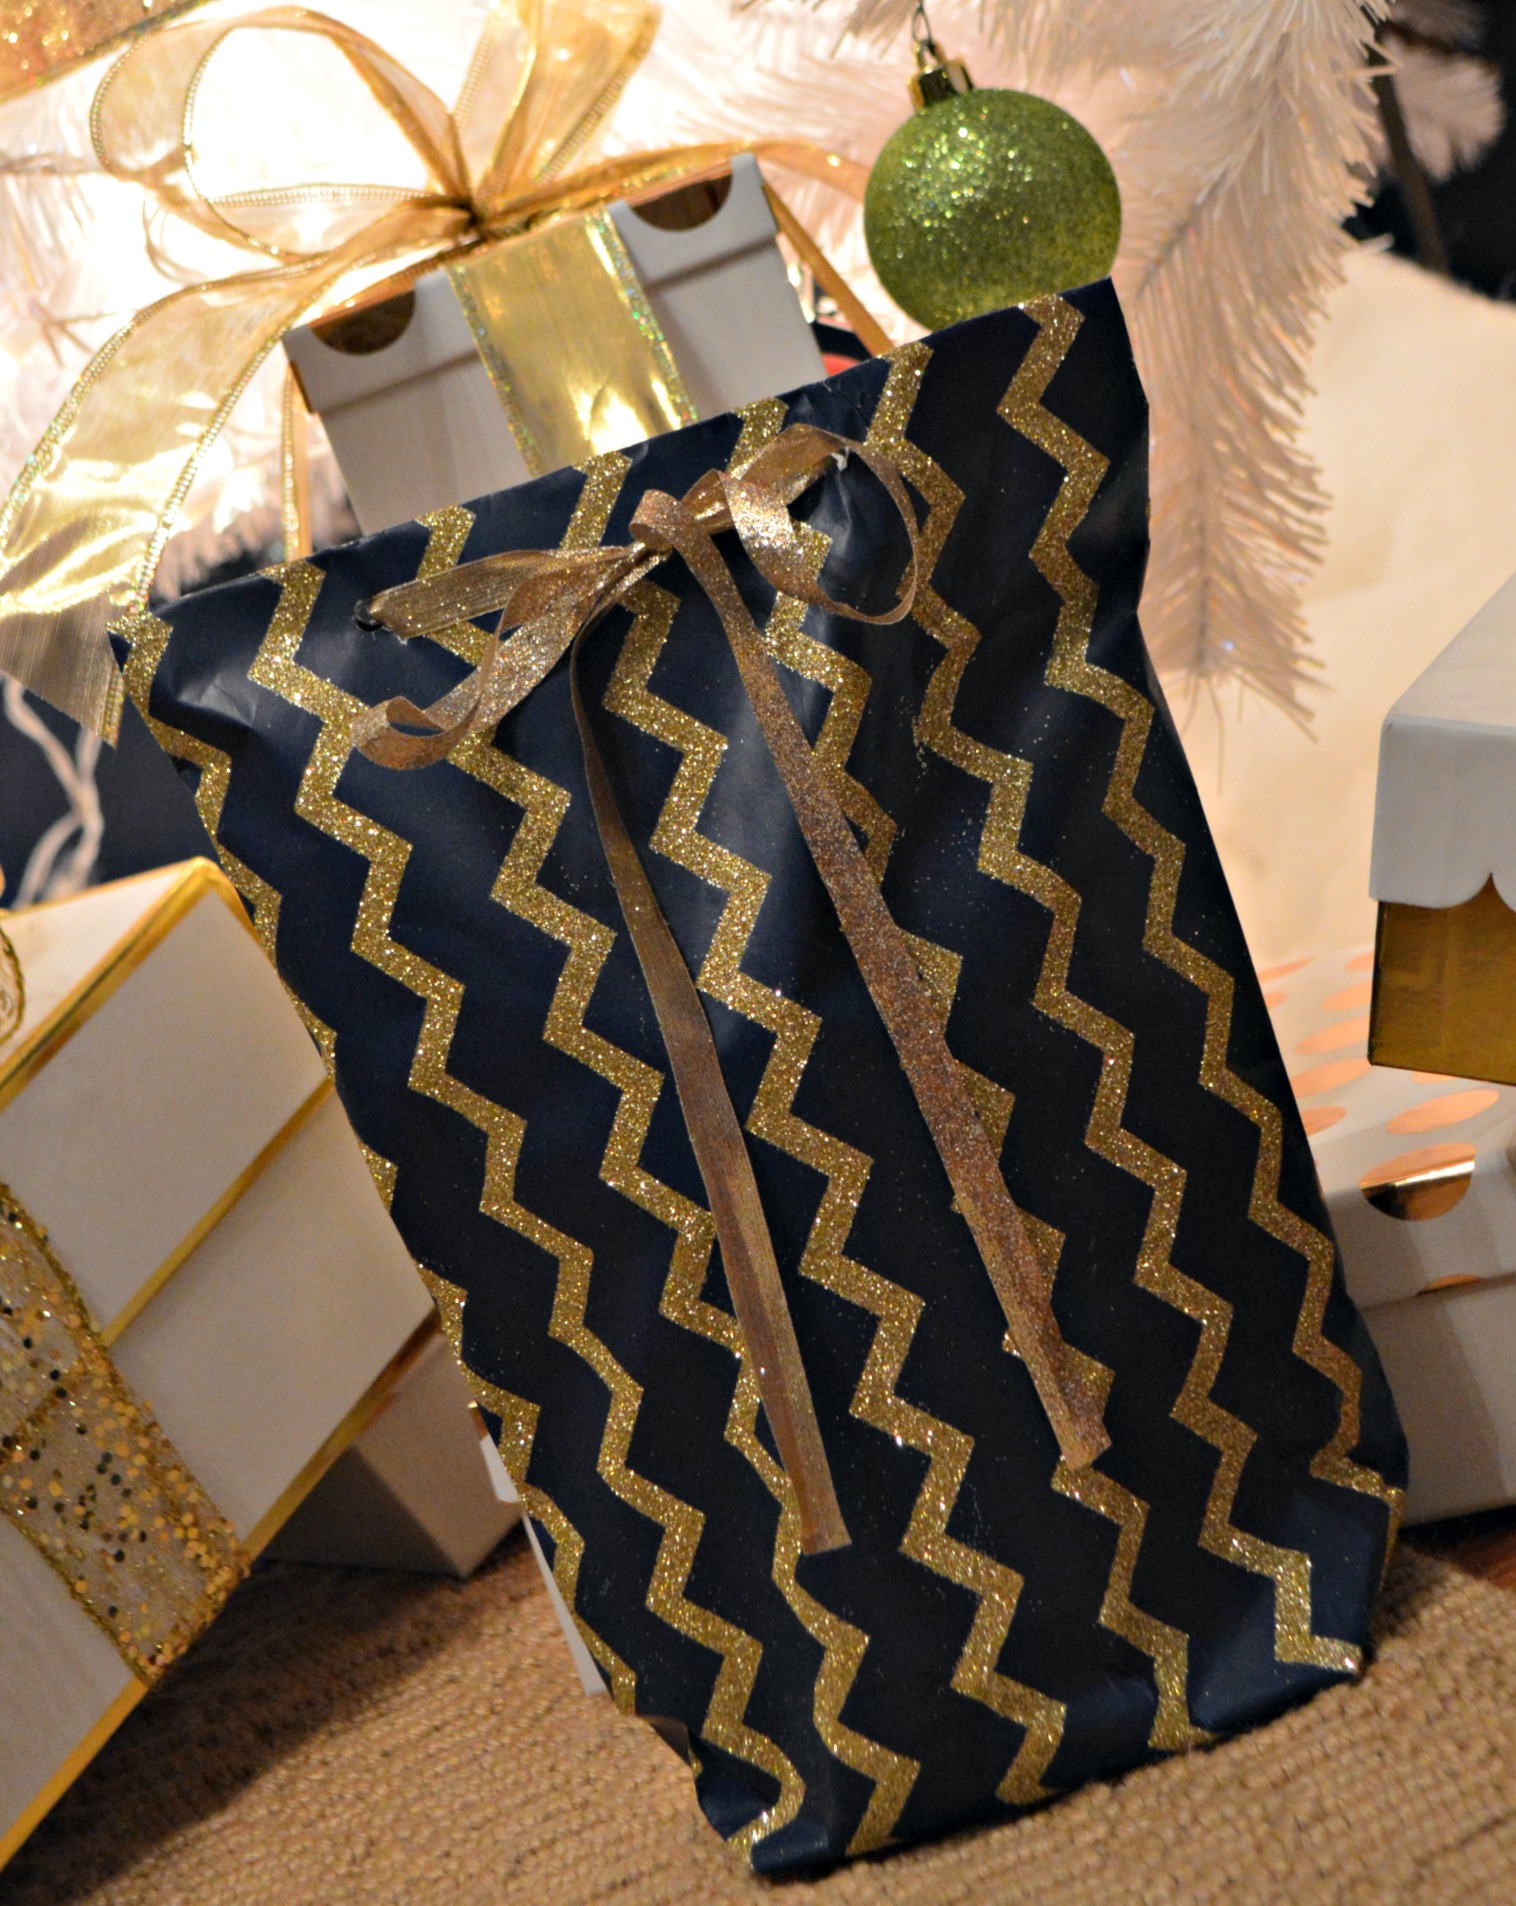 Homemade Gift Wrapping Papers, Make your own gift wrap papers